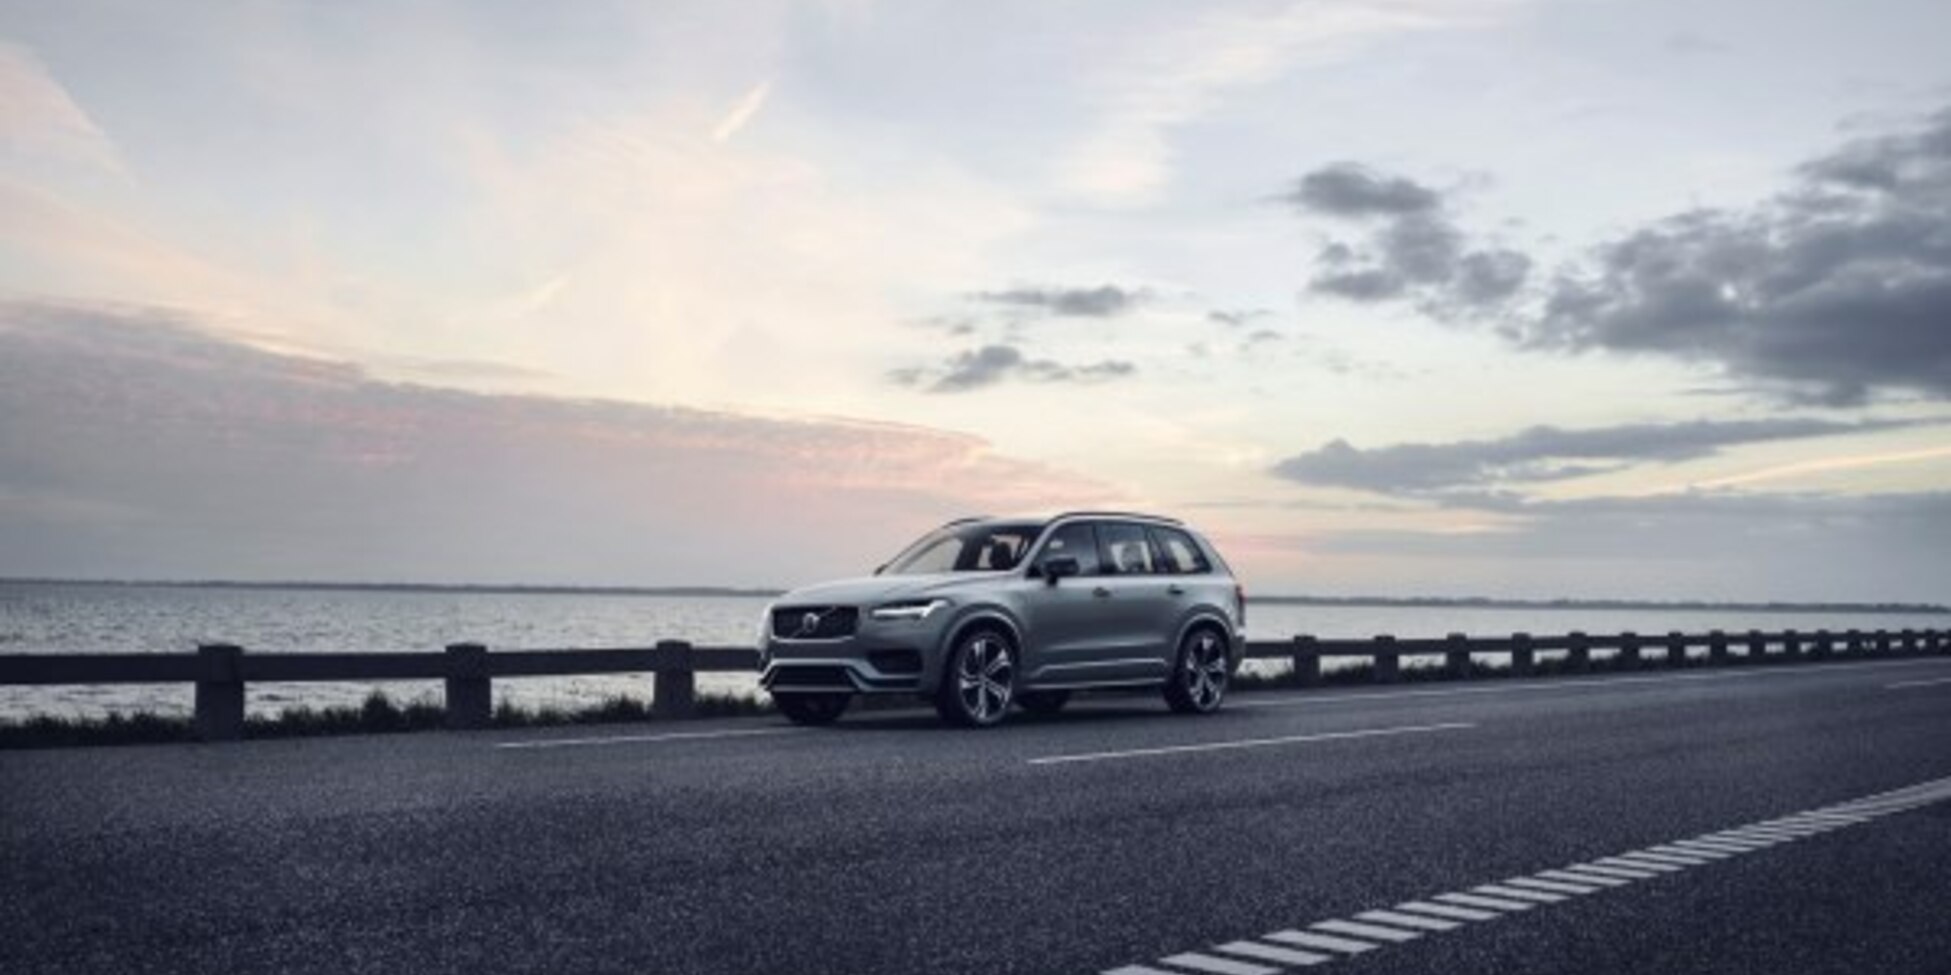 Volvo XC90 II (facelift 2019) 2.0 T5 (250 Hp) AWD Automatic 7 Seat 2019